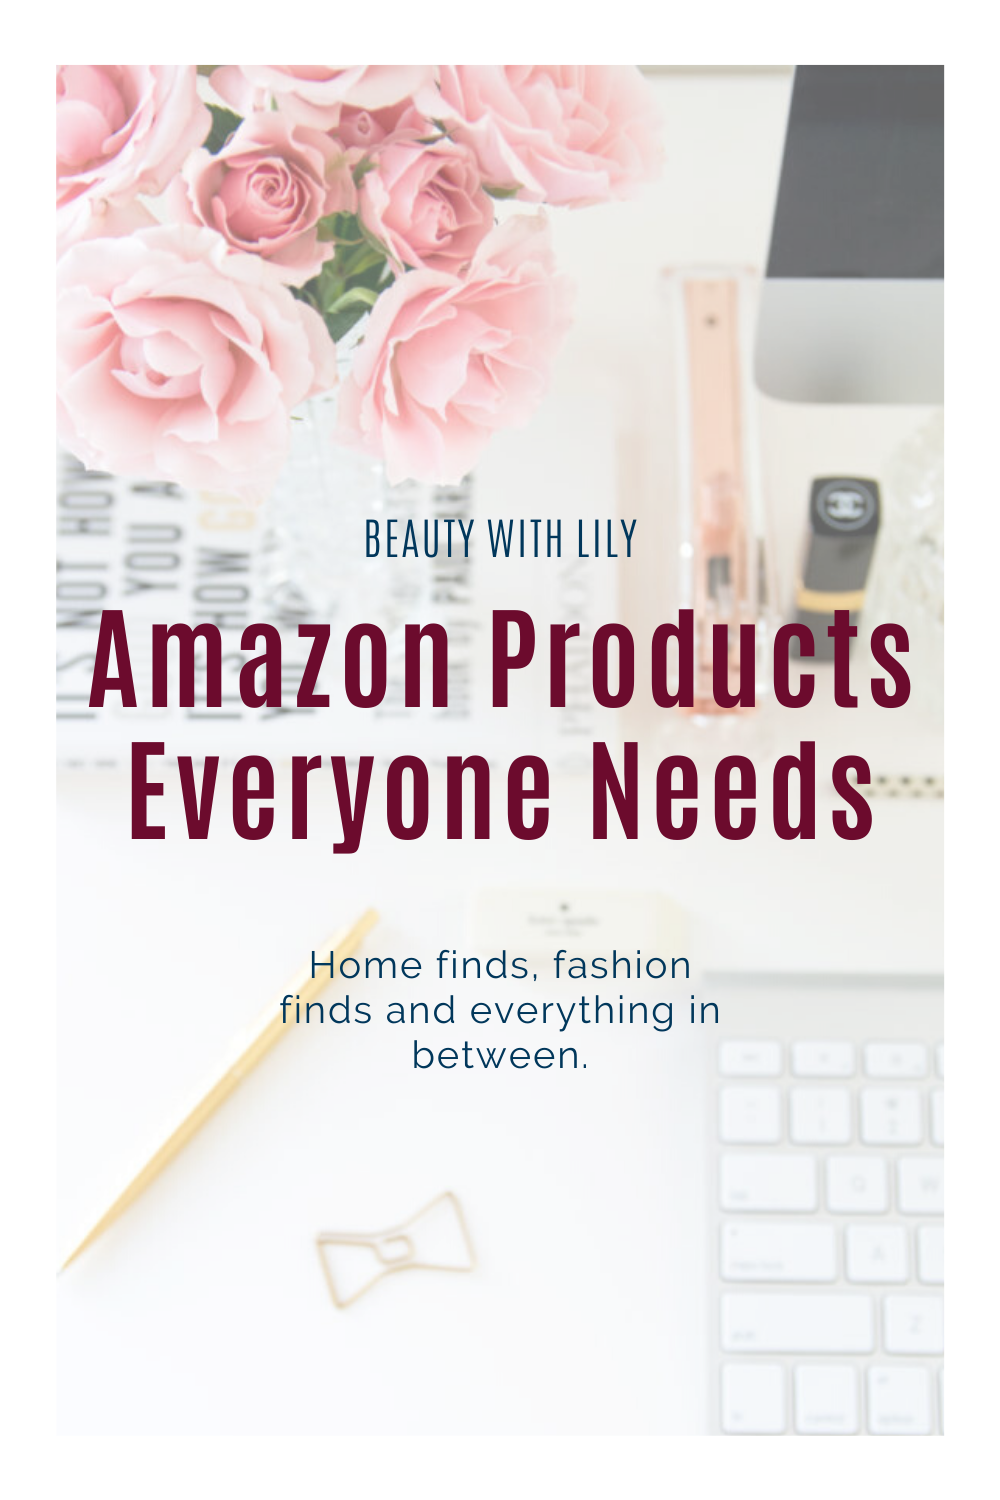 Current Amazon Favorites // Amazon Products Everyone Needs // Affordable Amazon Products // Online Shopping // What to Buy on Amazon // Home Decor // Organizational Kitchen Items // Pantry Organizational Items // Amazon Must Haves // Amazon Finds // Amazon Things To Buy | Beauty With Lily #amazonfinds #amazonfavorites #amazonmusthaves